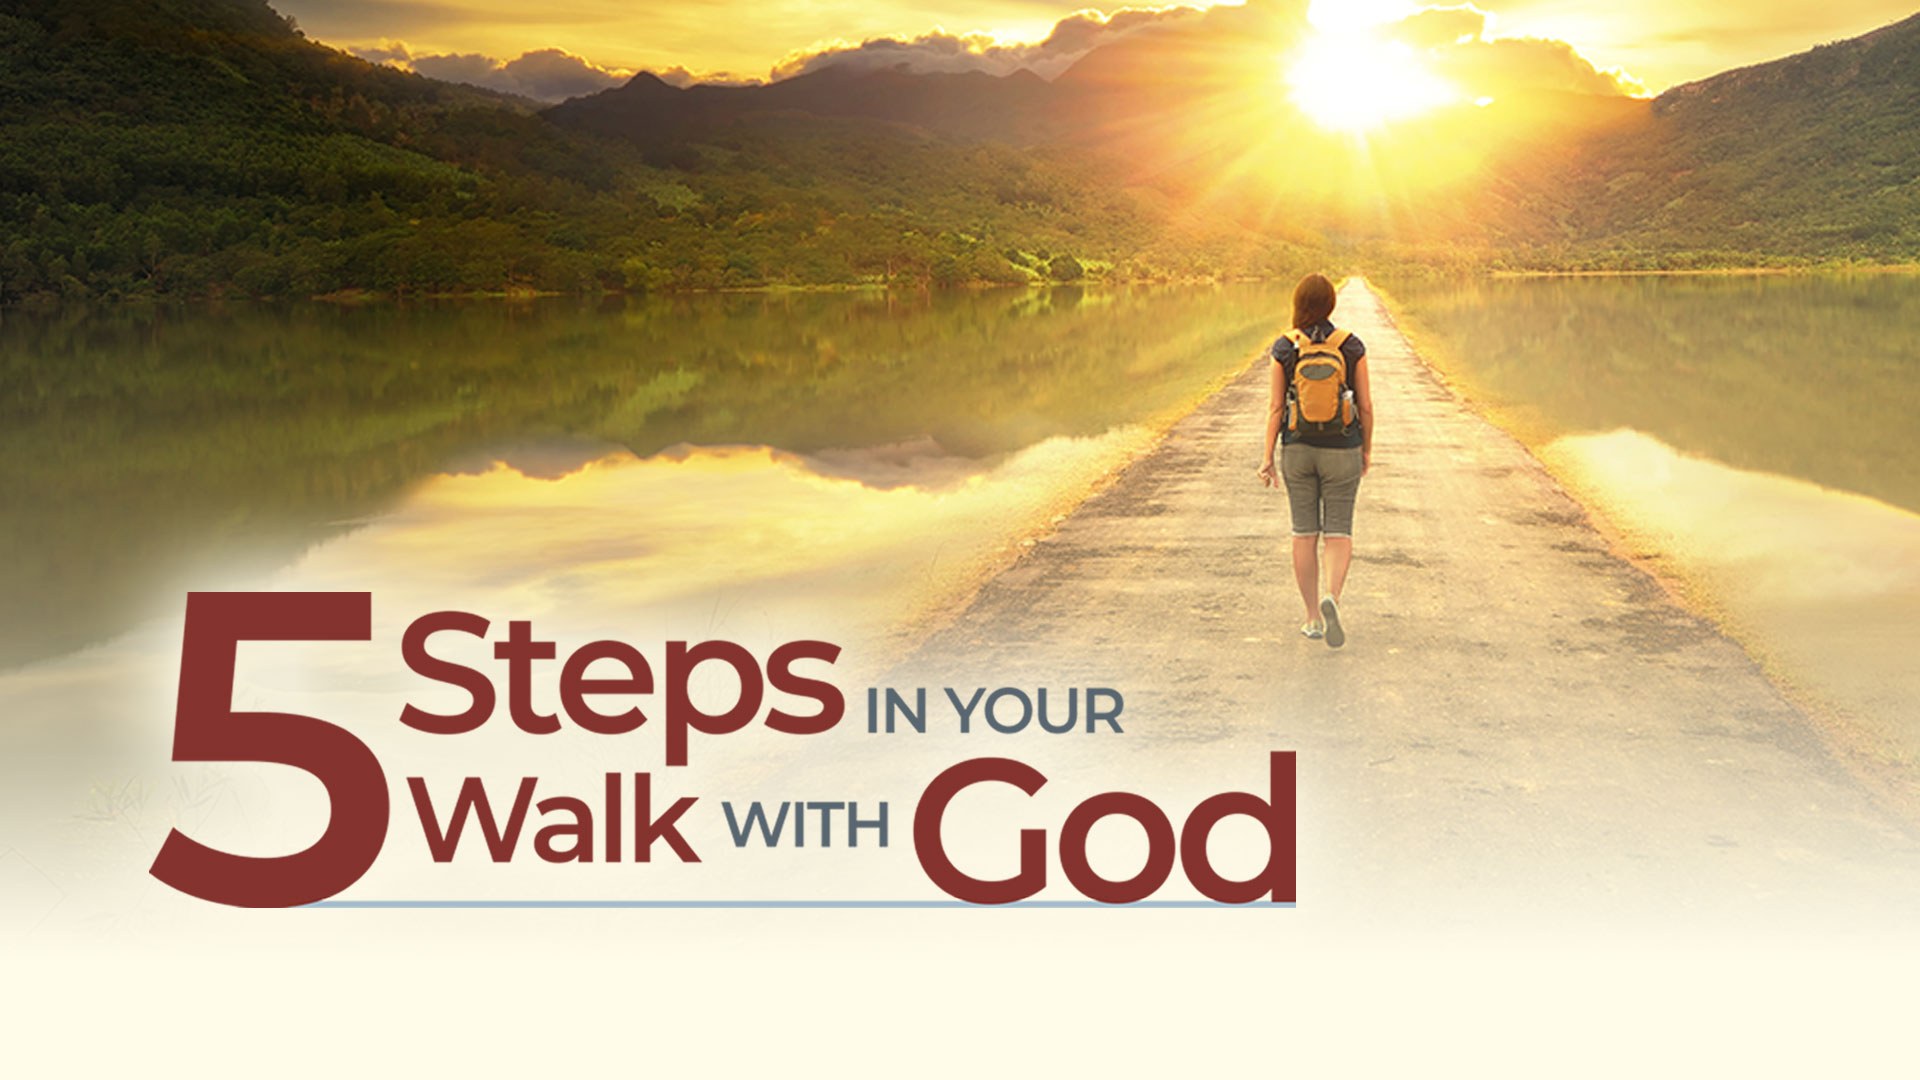 5 Steps in Your Walk With God 1920x1080